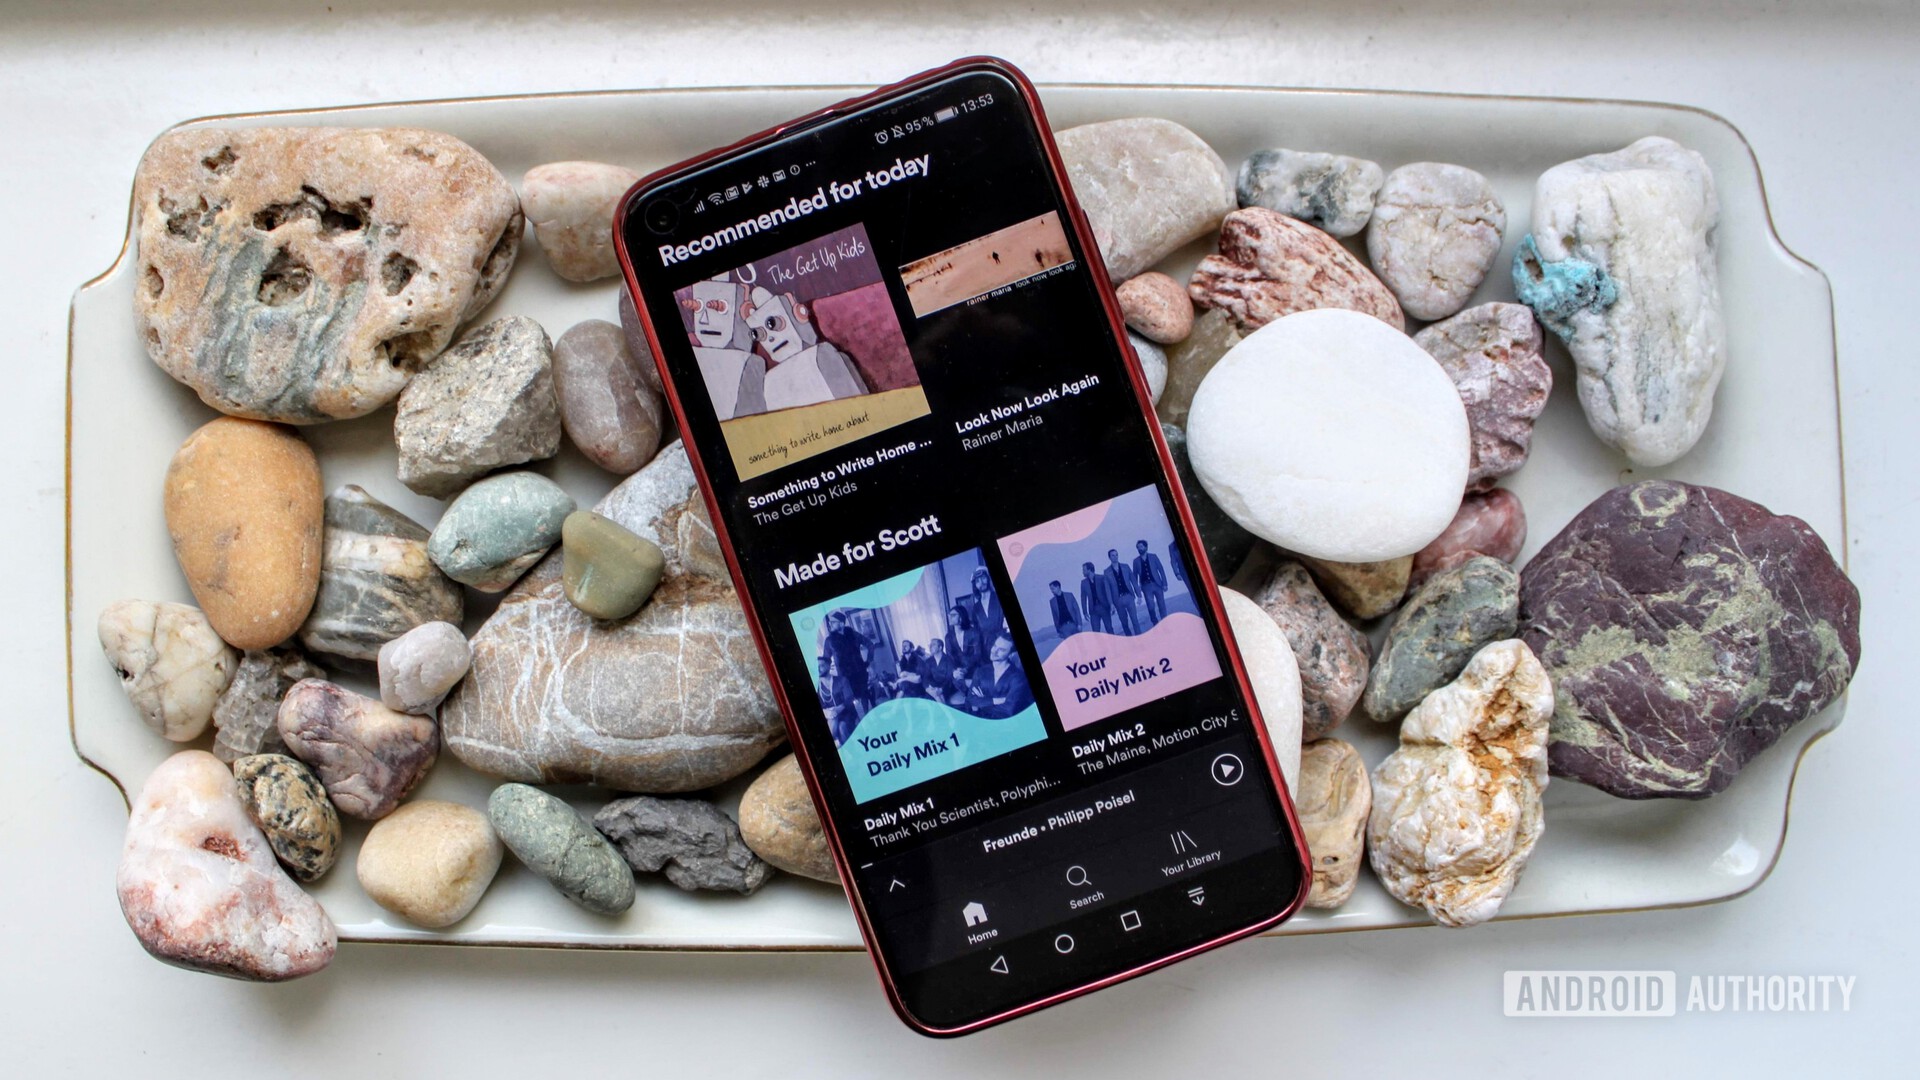 Spotify menu on a smartphone on a bed of rocks